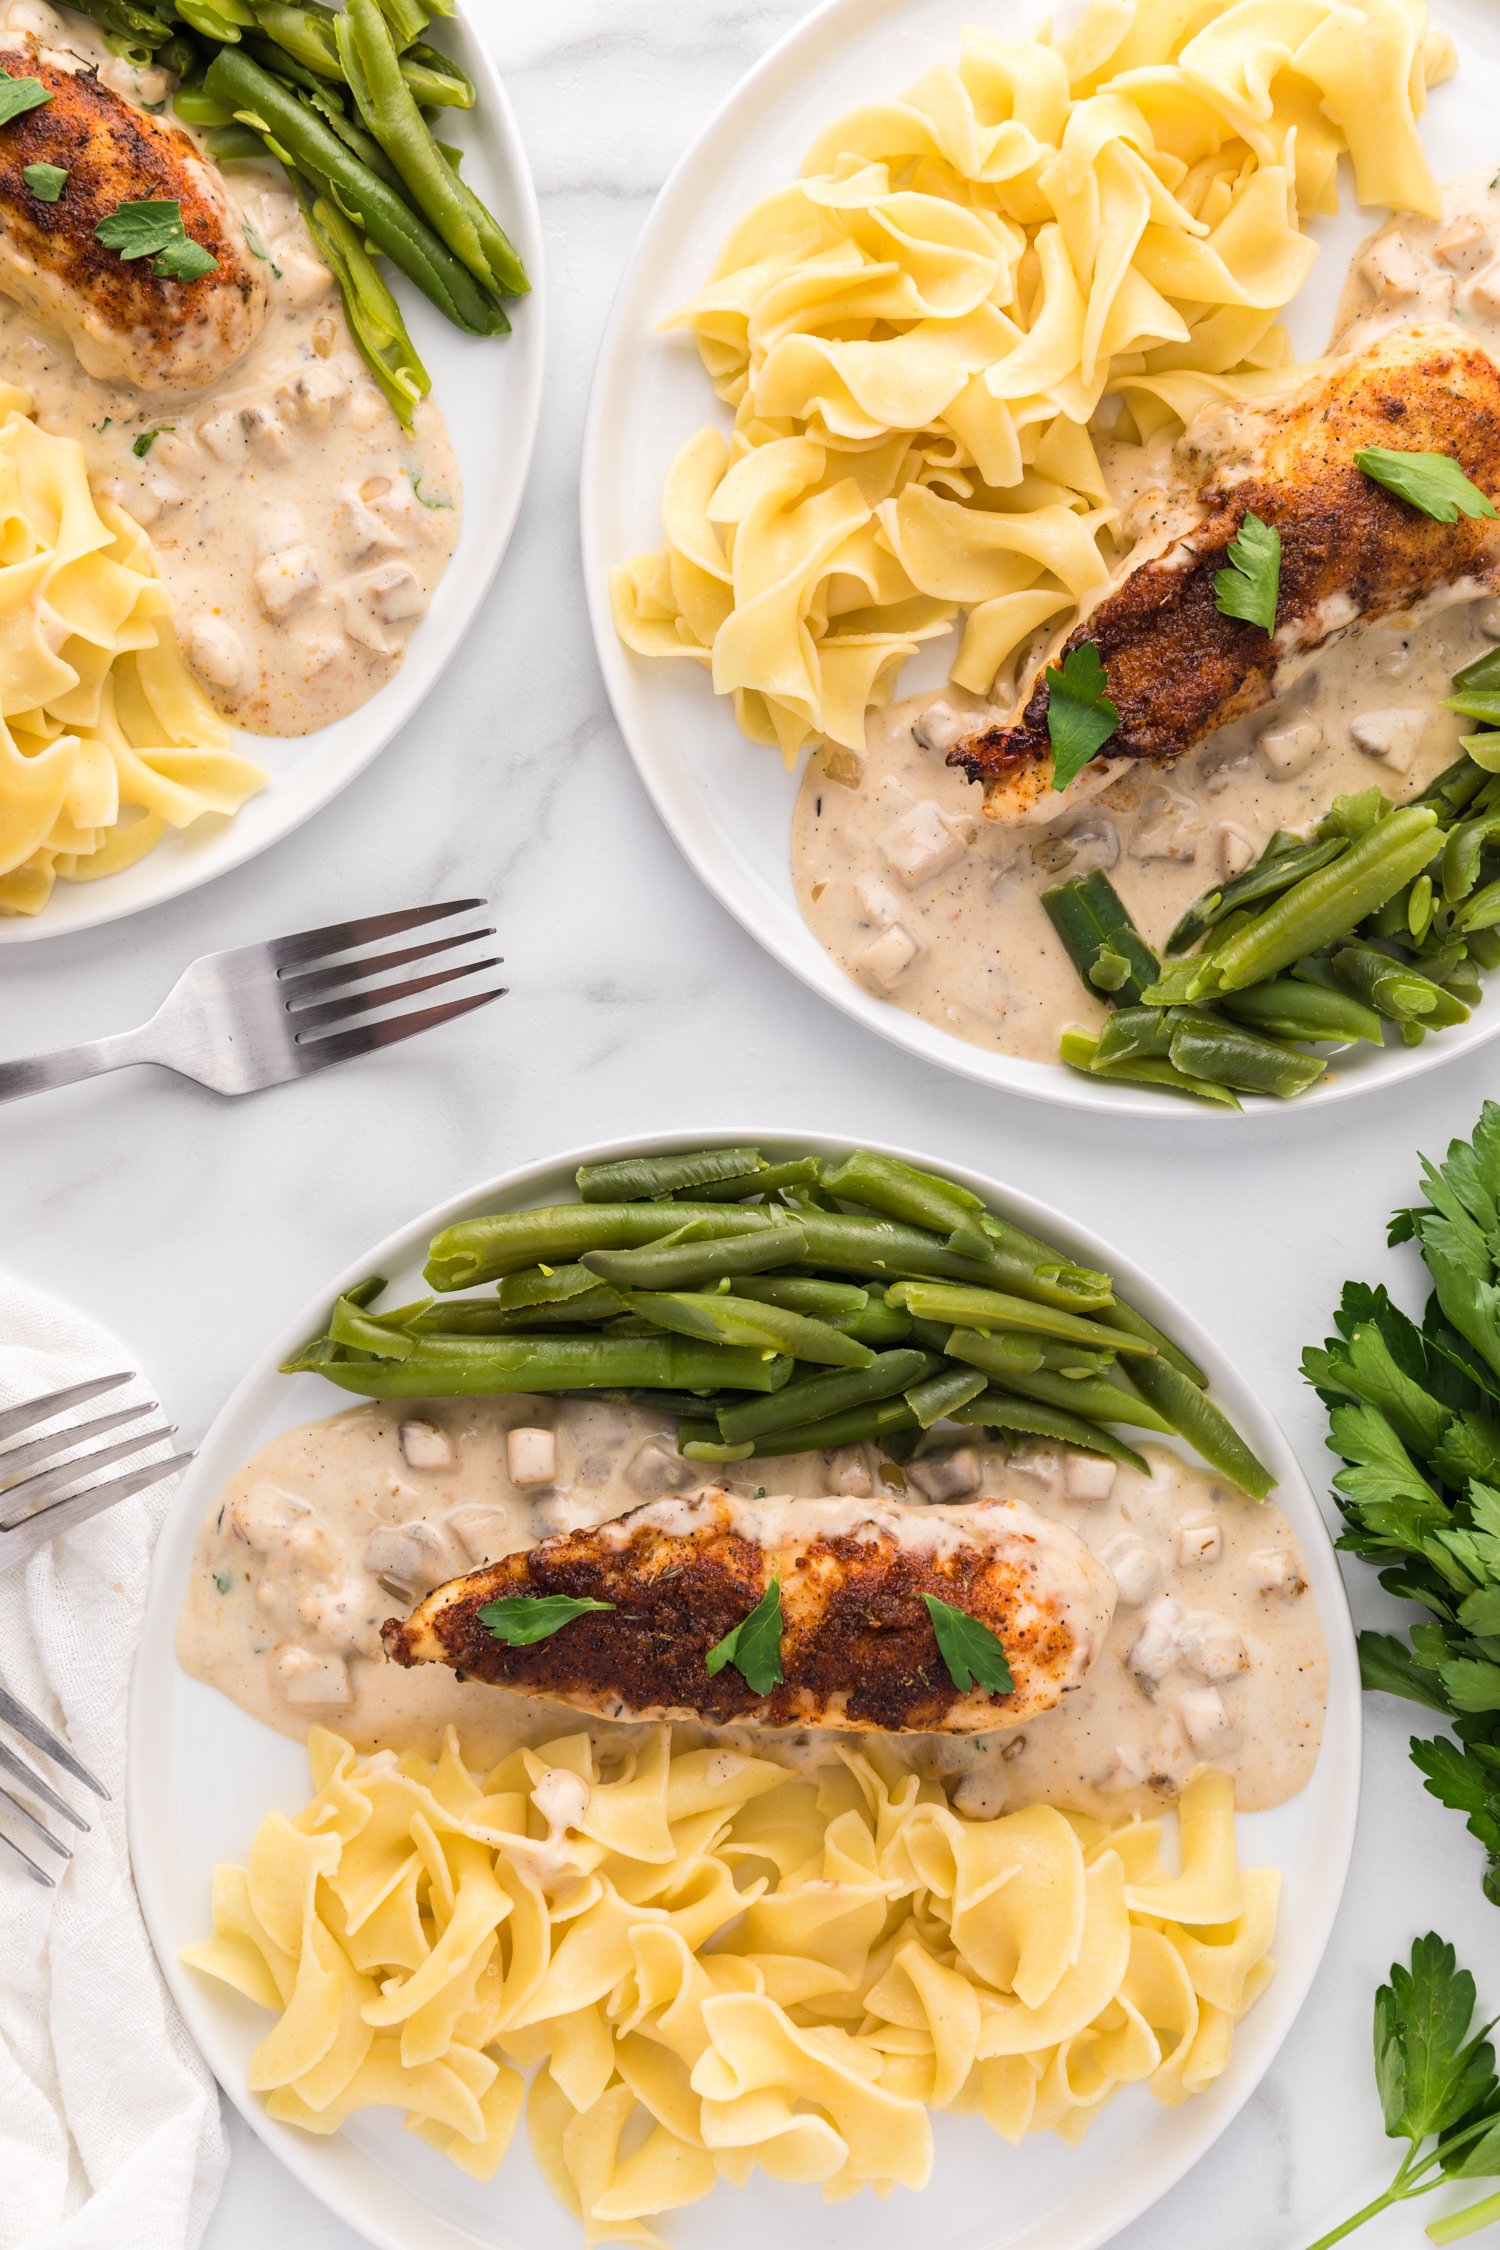 Overhead view of plates of cream of mushroom chicken served over egg noodles with a side of green beans.